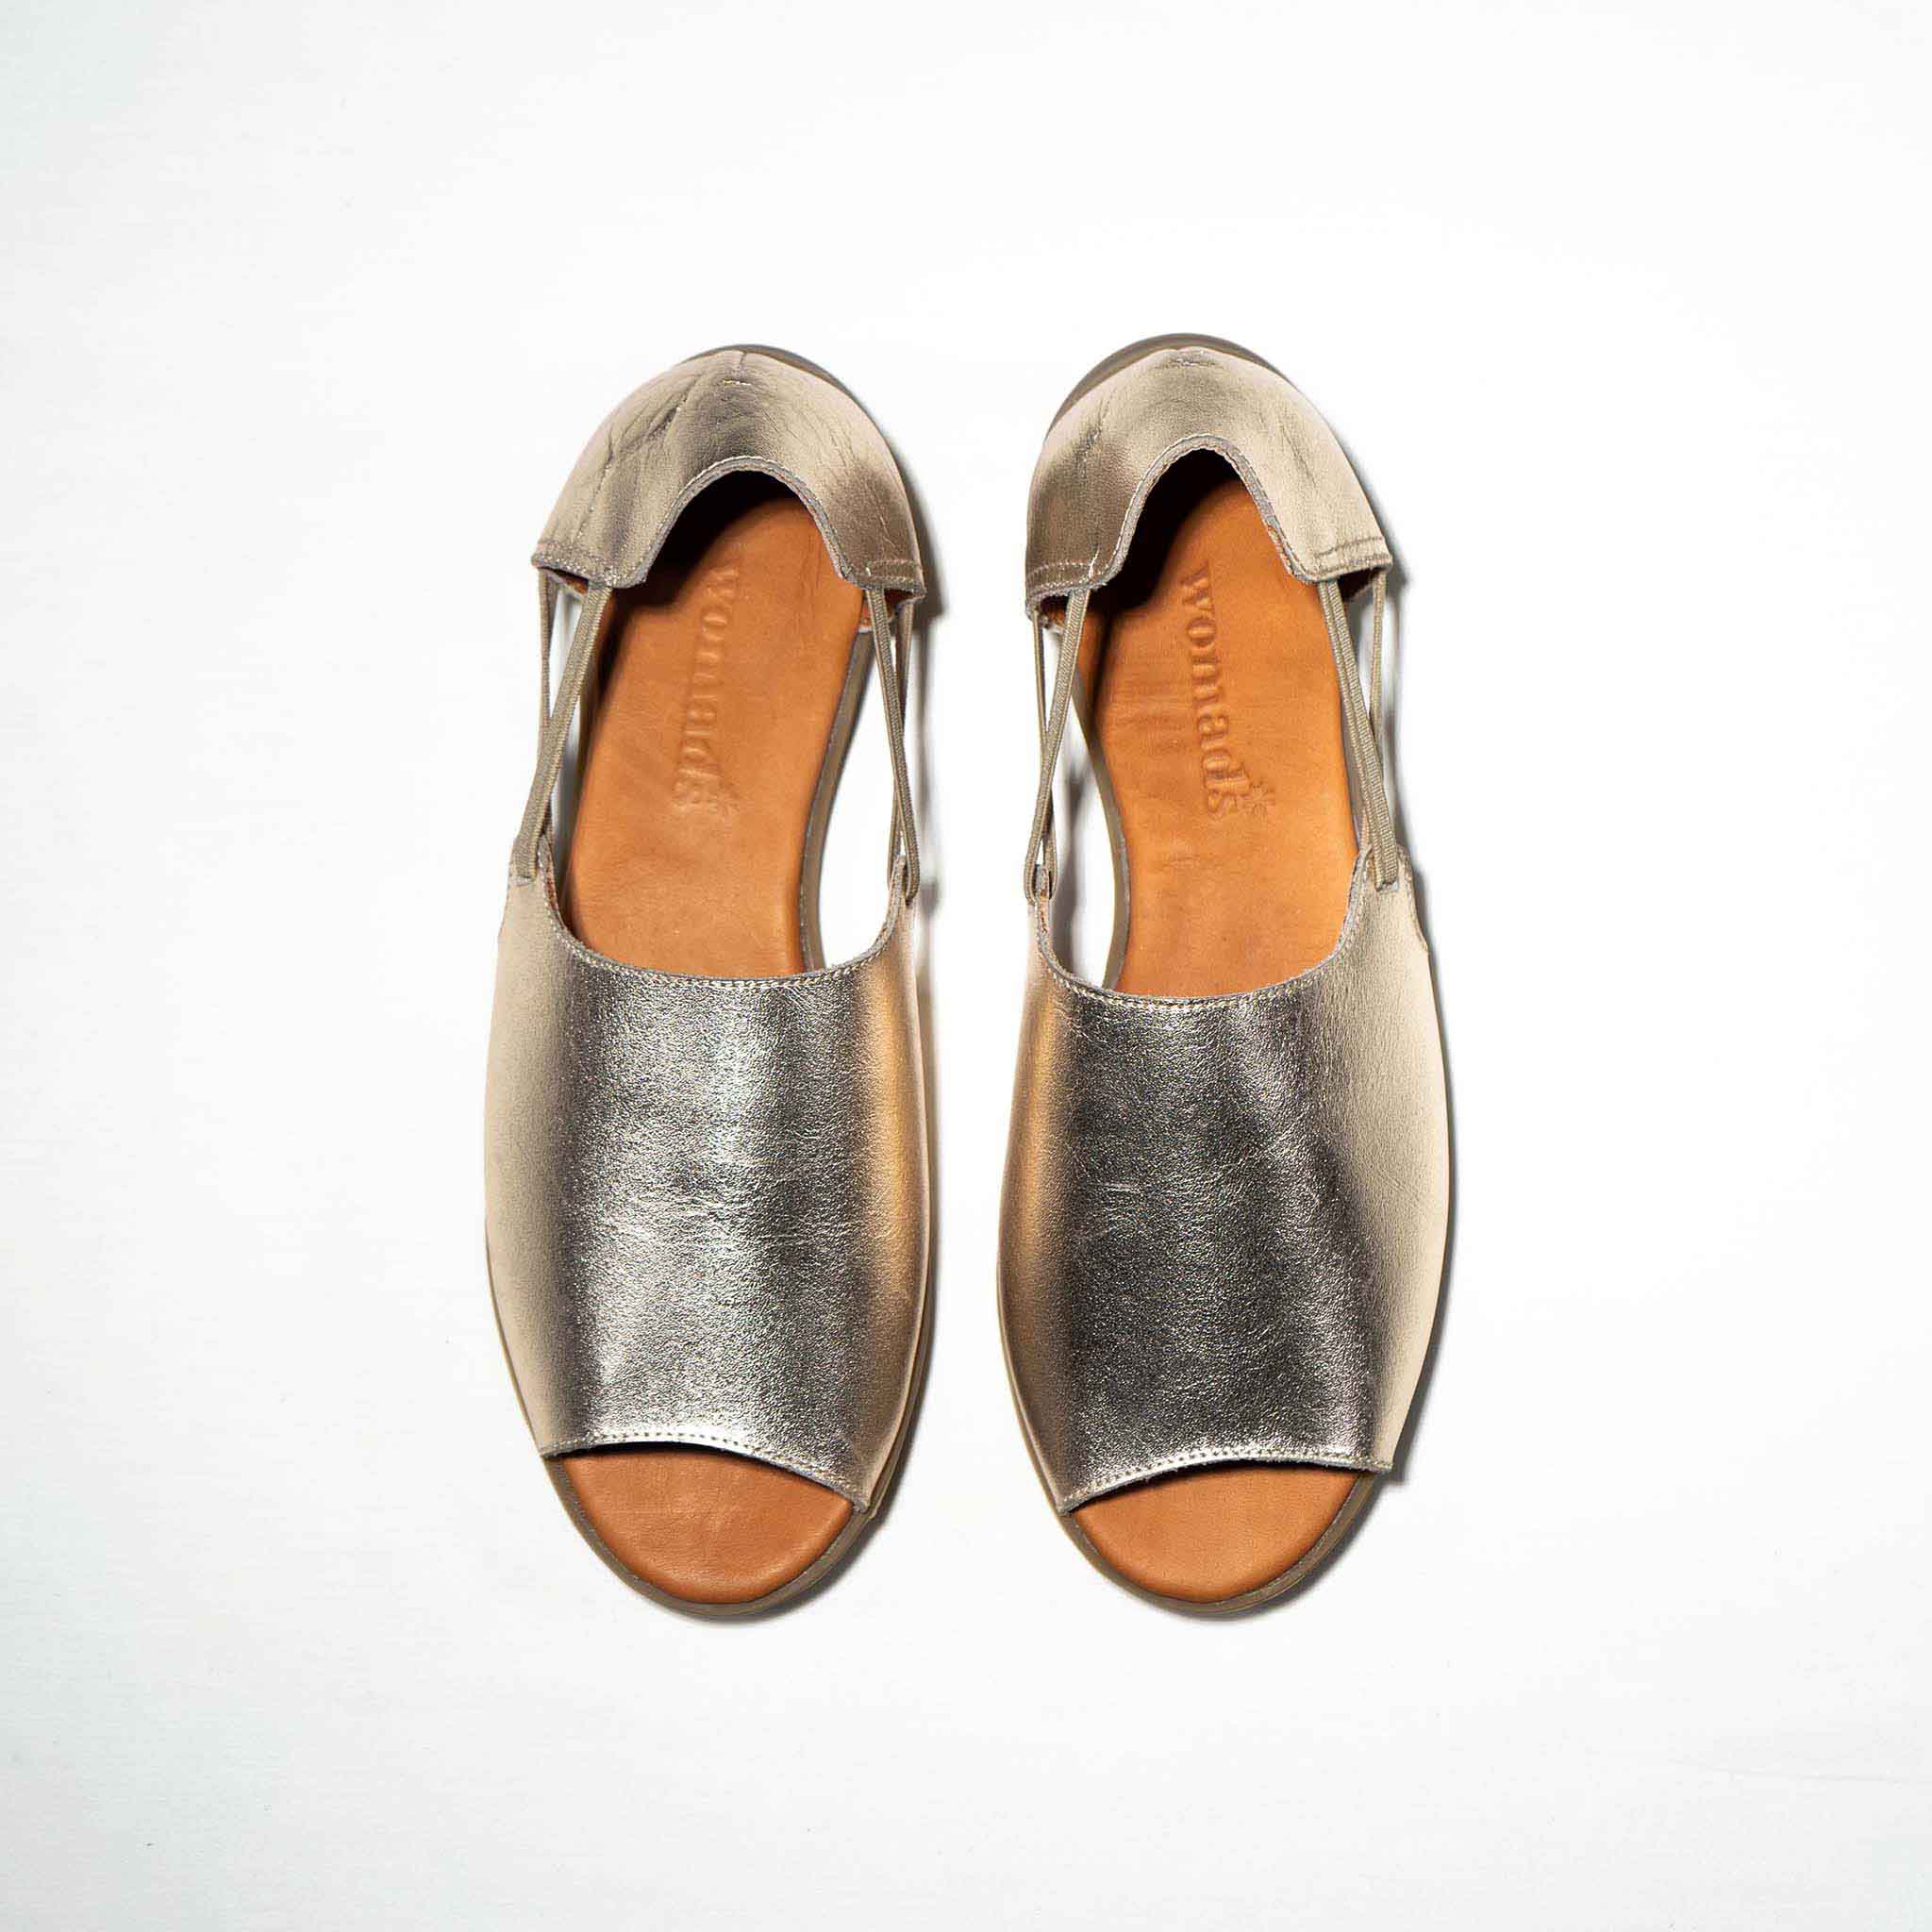 5 Graceful Flats With Arch Support (Yes, it's true!)